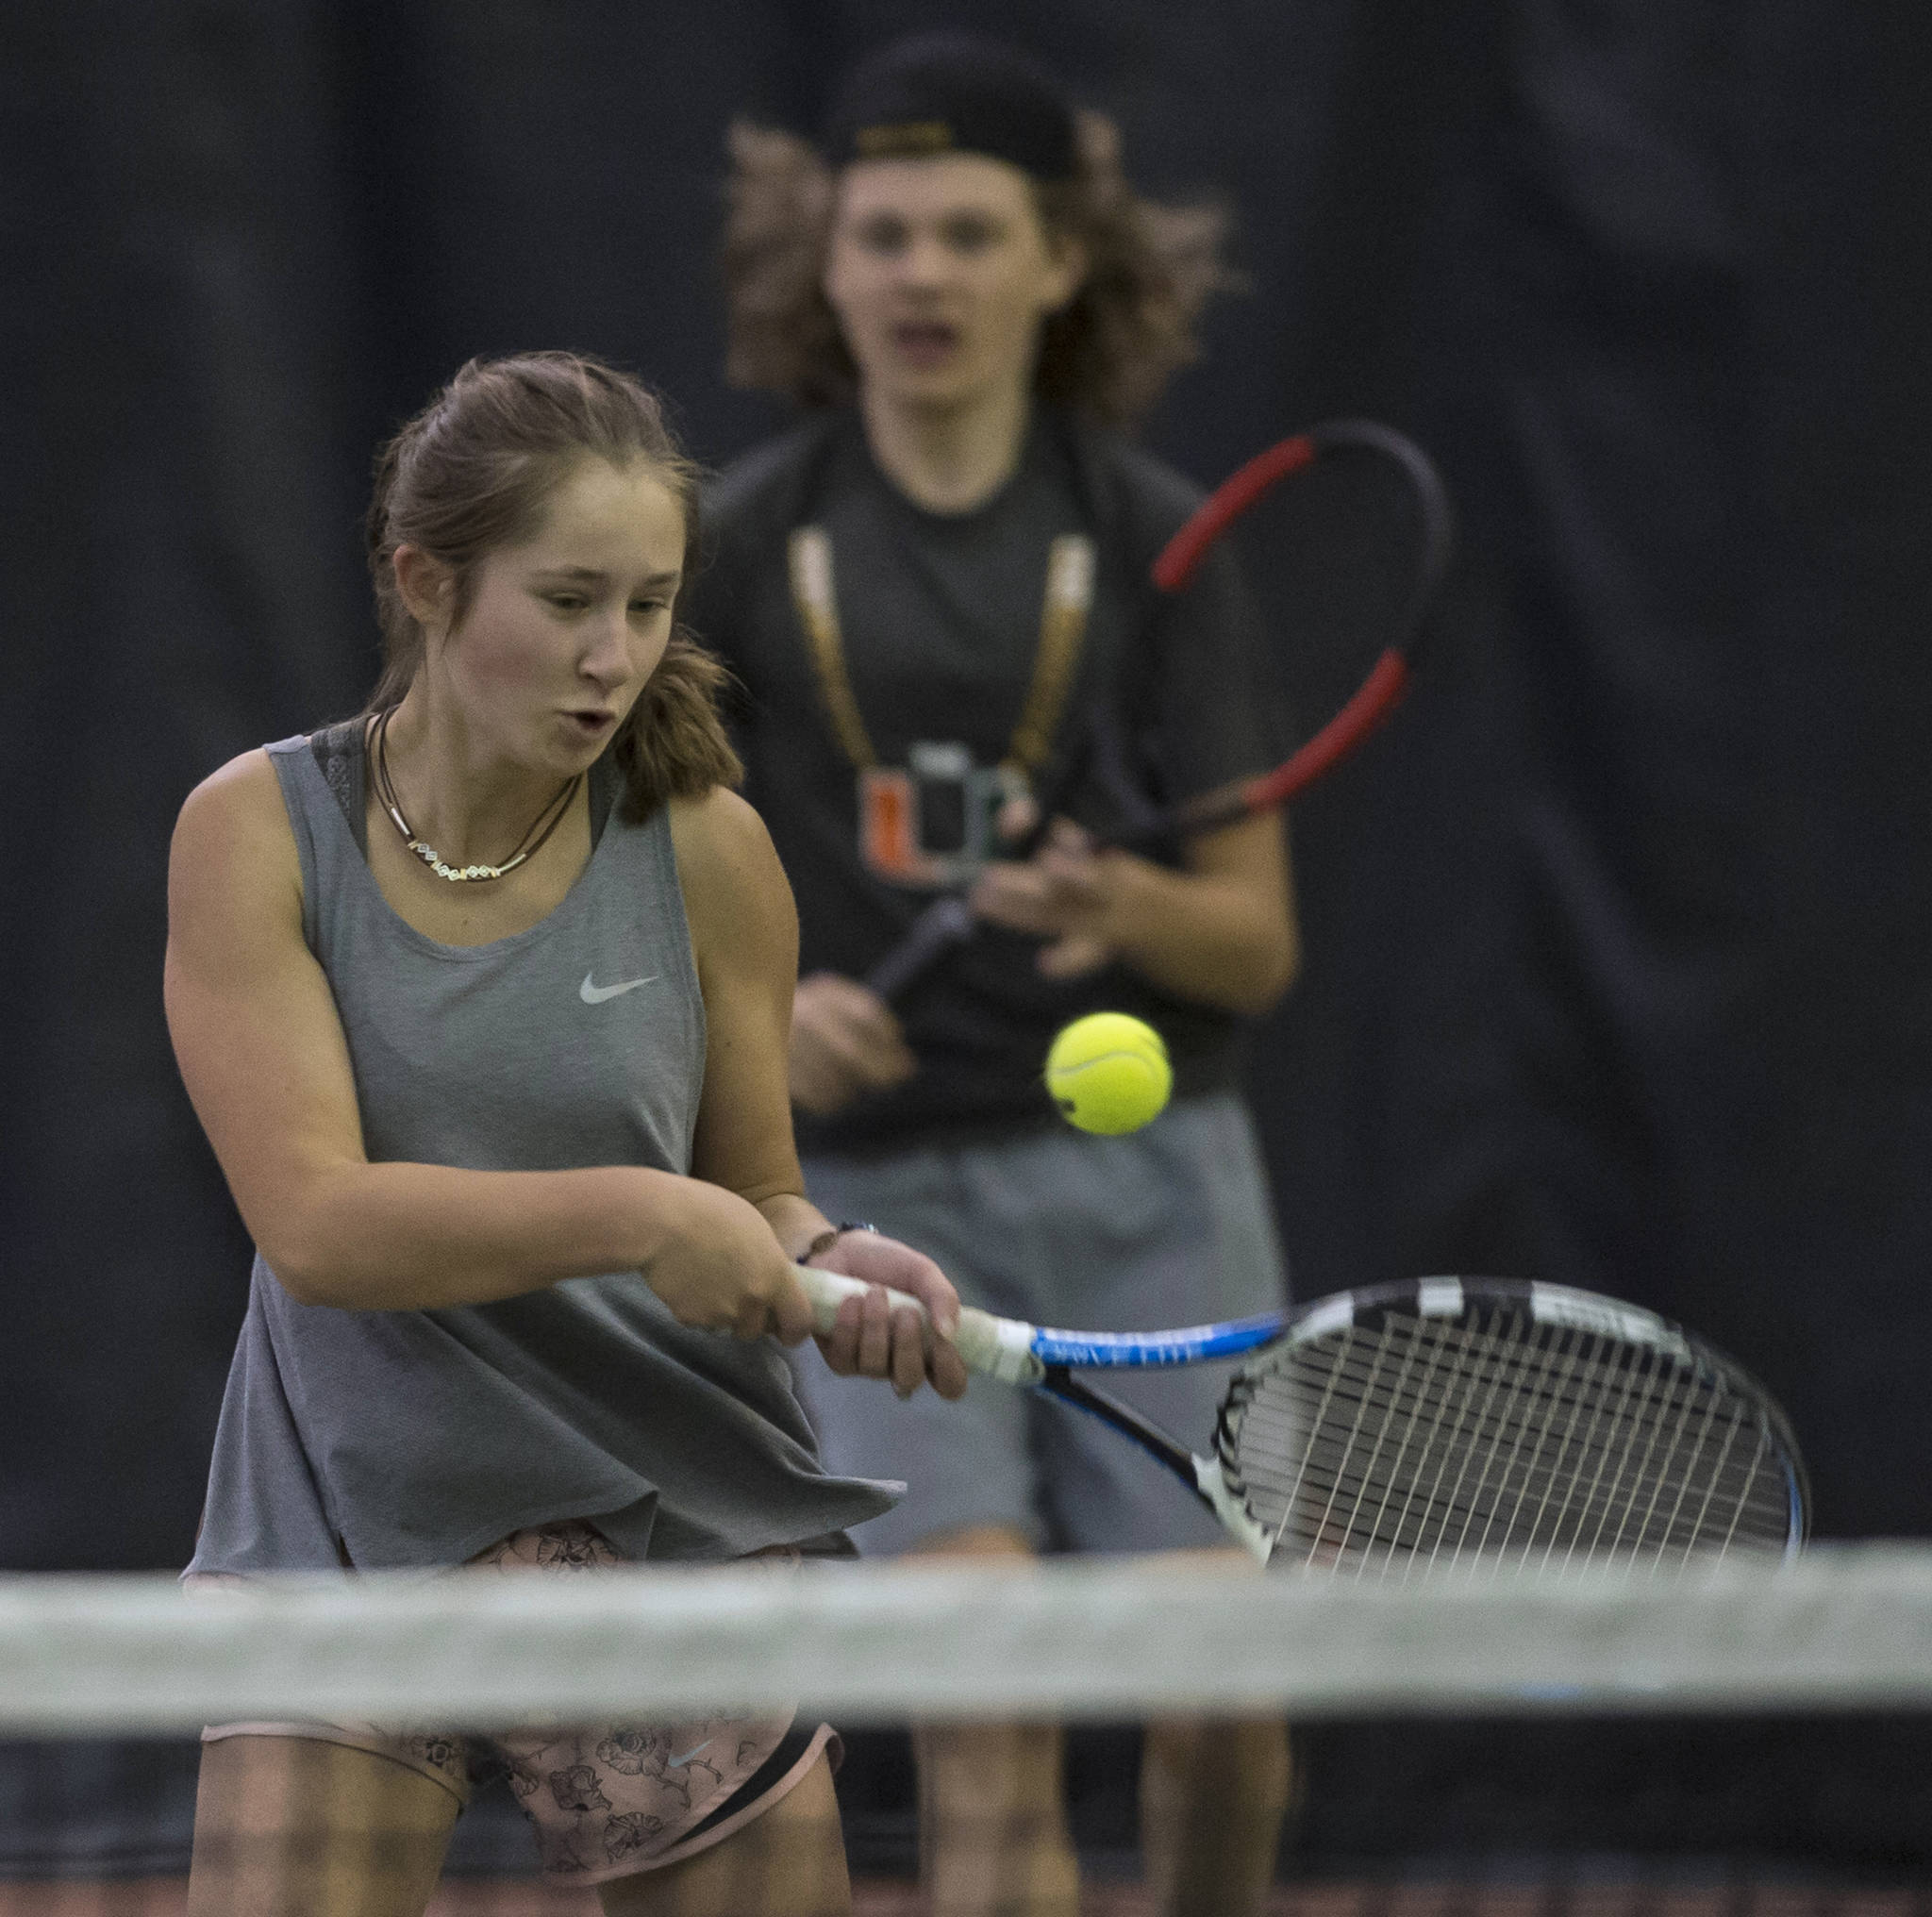 Adelie McMillan volleys a ball against the team of Olivia Moore and River Reyes-Boyles during the Regional Tennis Championships at the JRC/The Alaska Club on Saturday, Sept. 22, 2018. McMillian is backed up by her partner Wolf Dostal in the mixed doubles match. (Michael Penn | Juneau Empire)